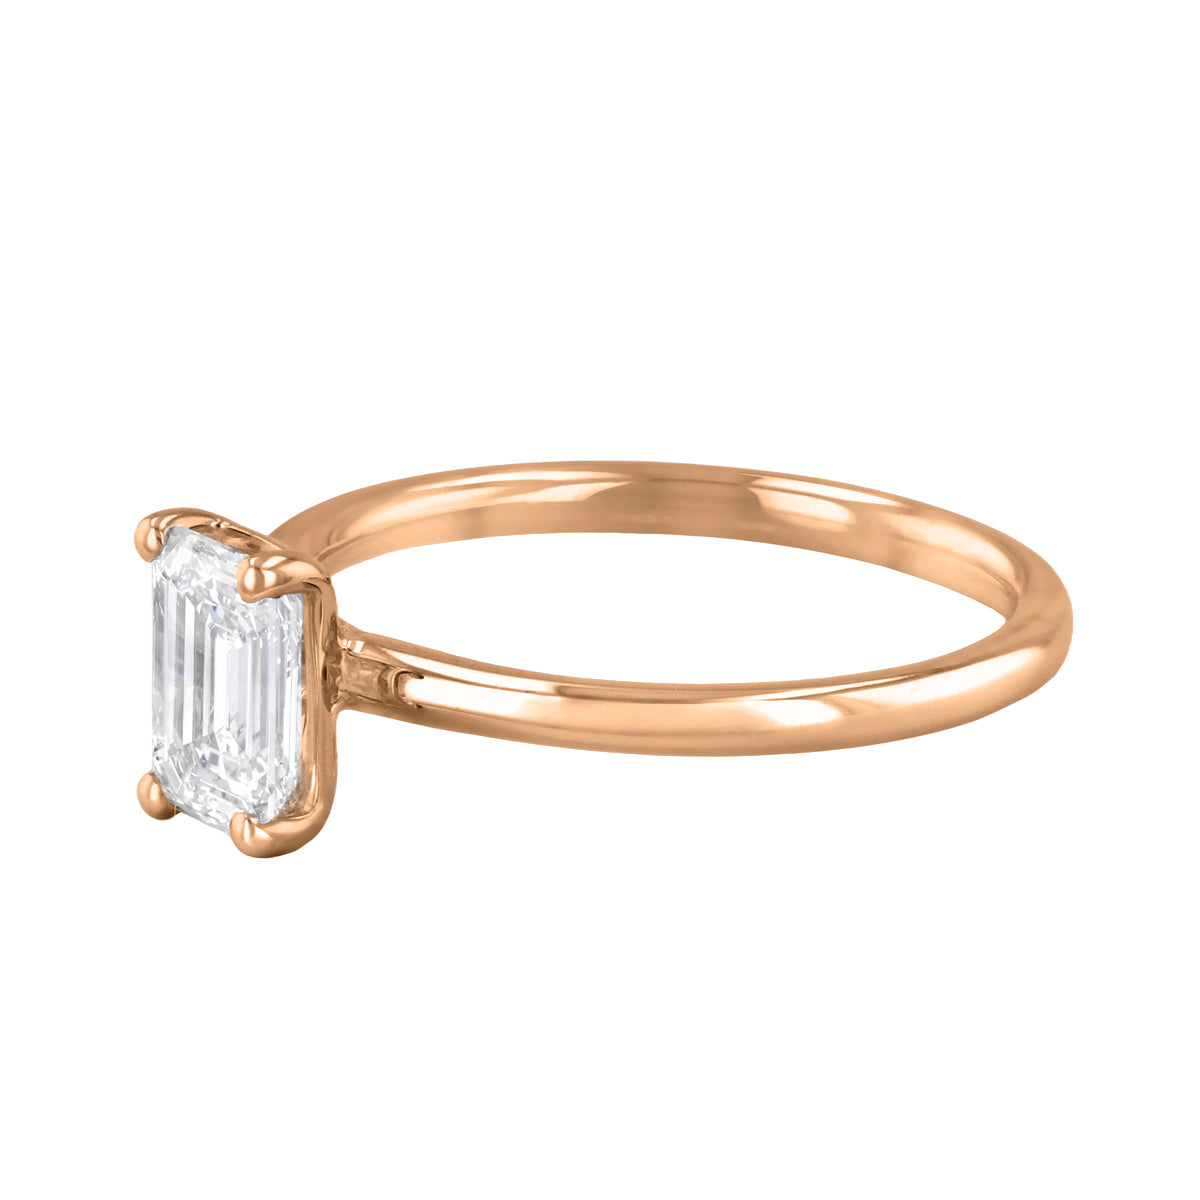 1-50ct-sofia-emerald-cut-solitaire-diamond-engagement-ring-18ct-rose-gold